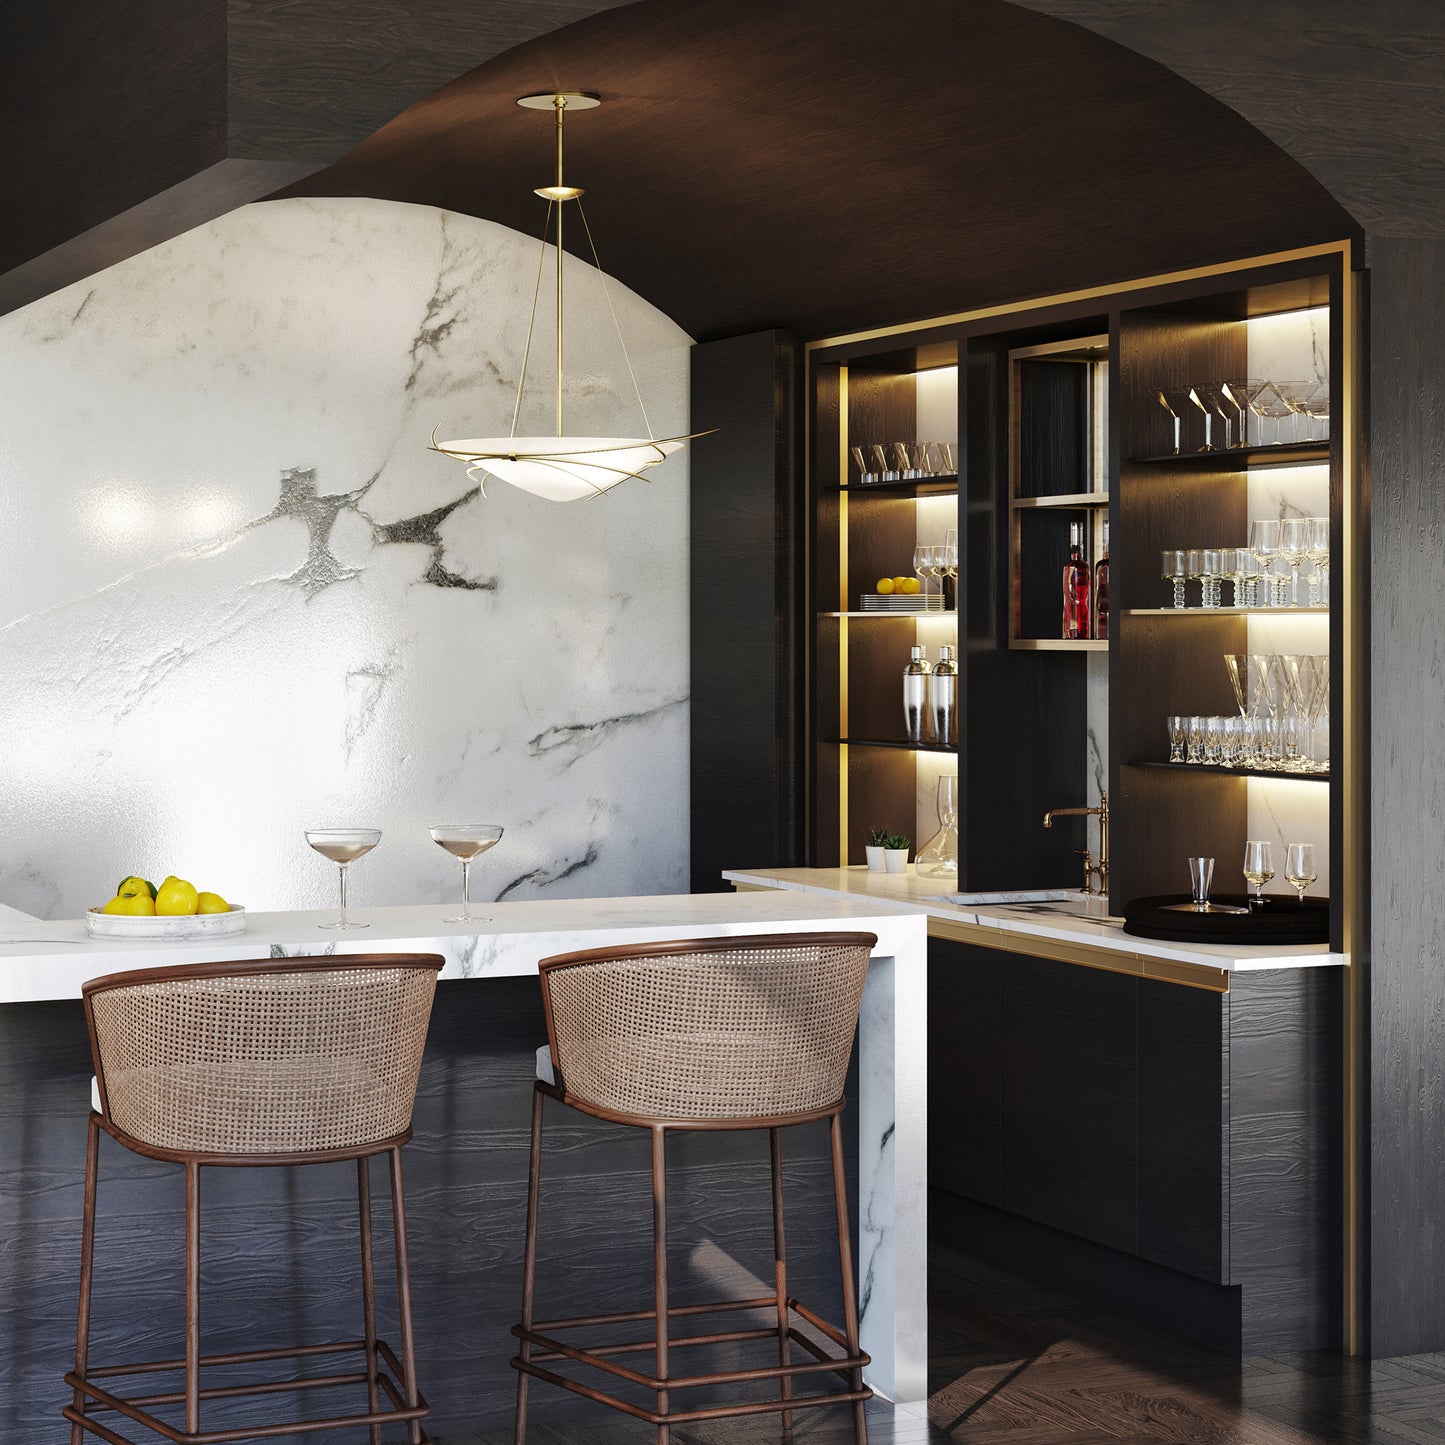 A modern bar with tailored marble counter tops and stools, featuring the Hubbardton Forge Wisp Pendant, creating an elegant ambiance.